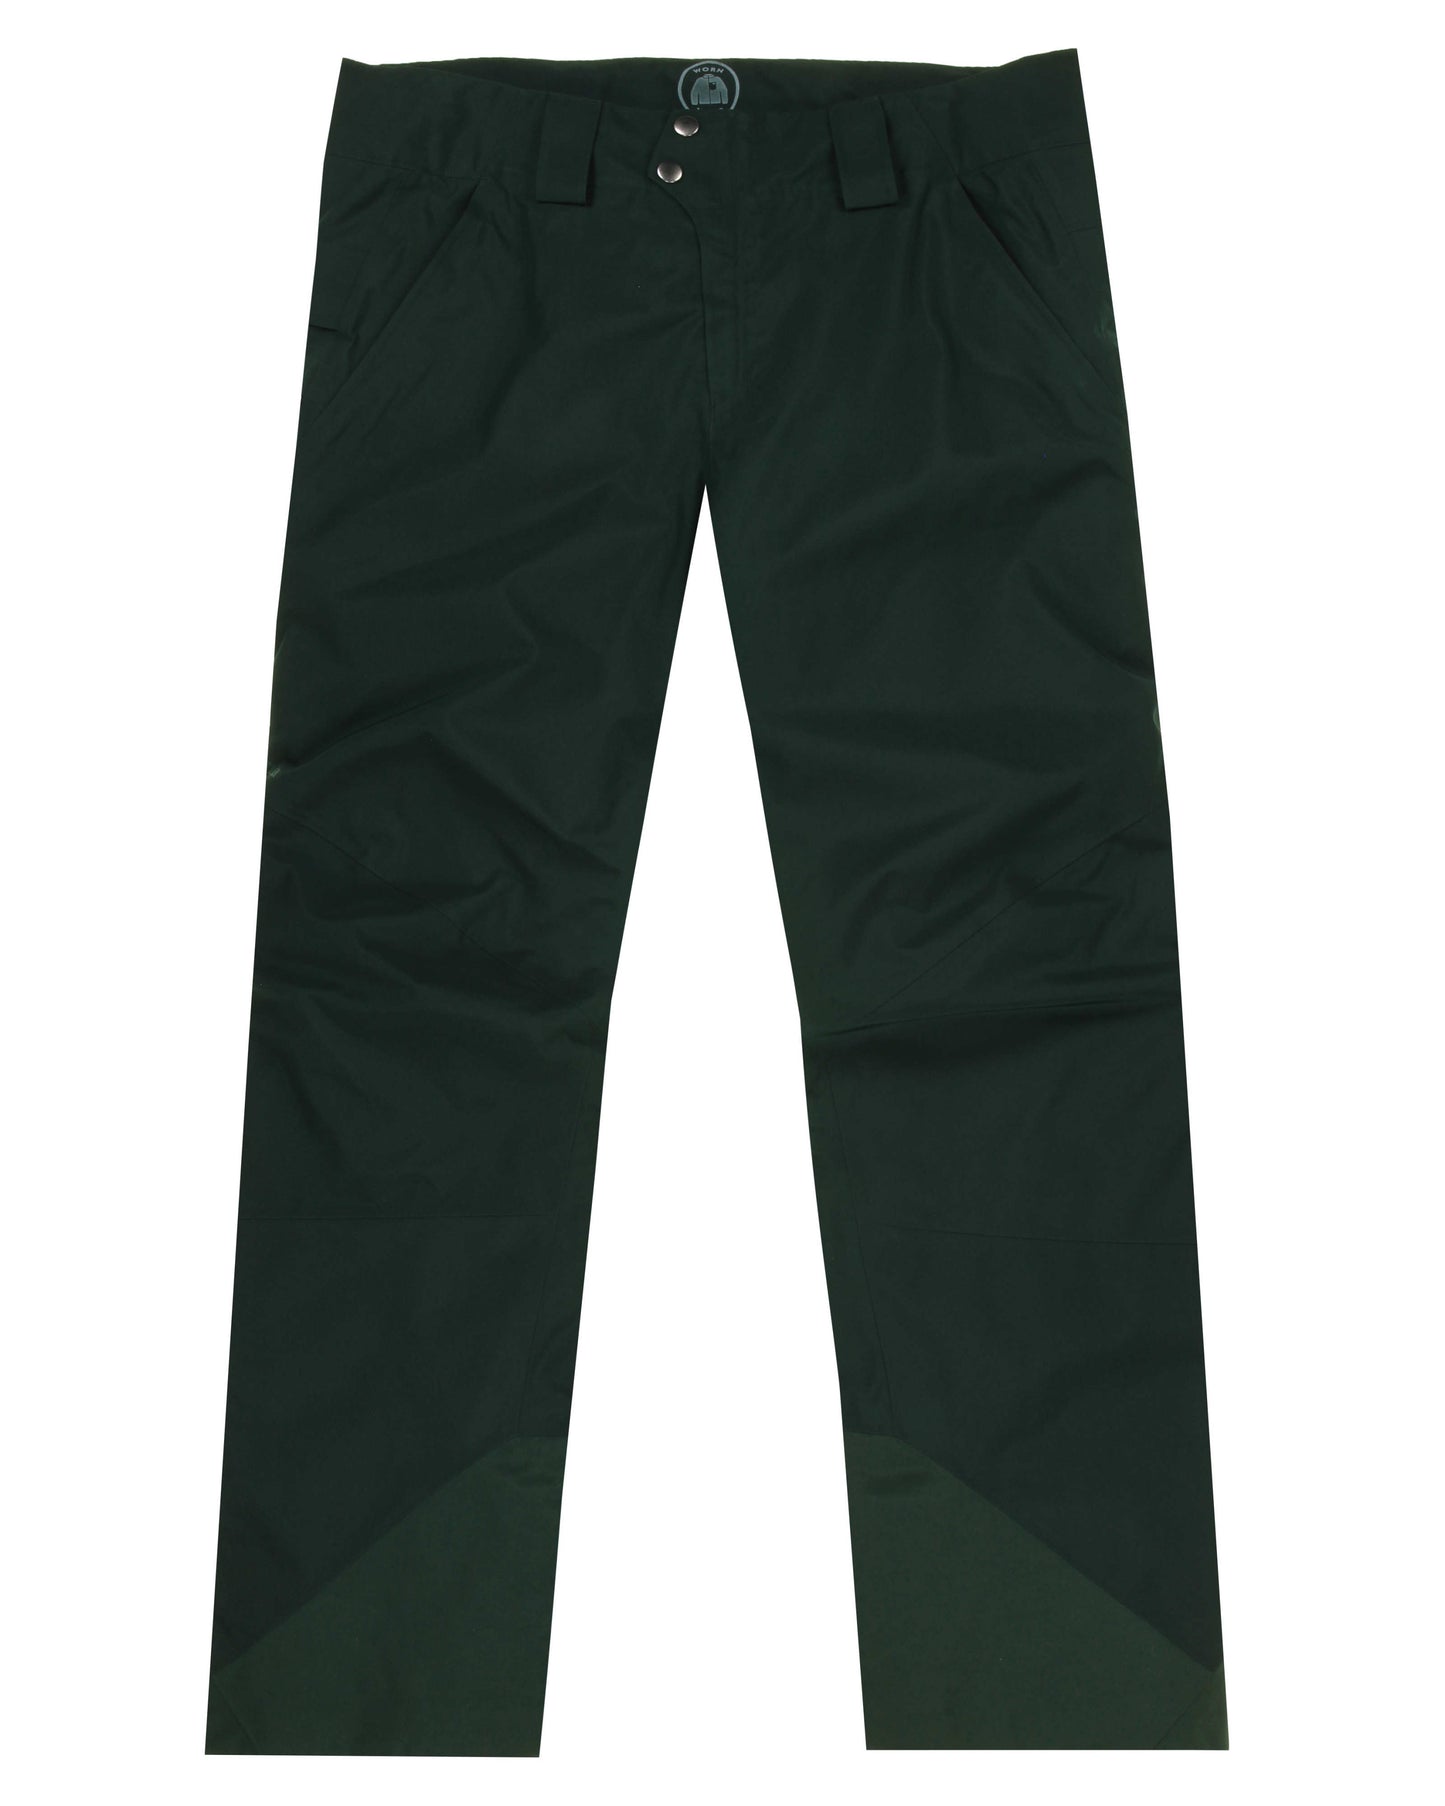 M's Insulated Powder Bowl Pants